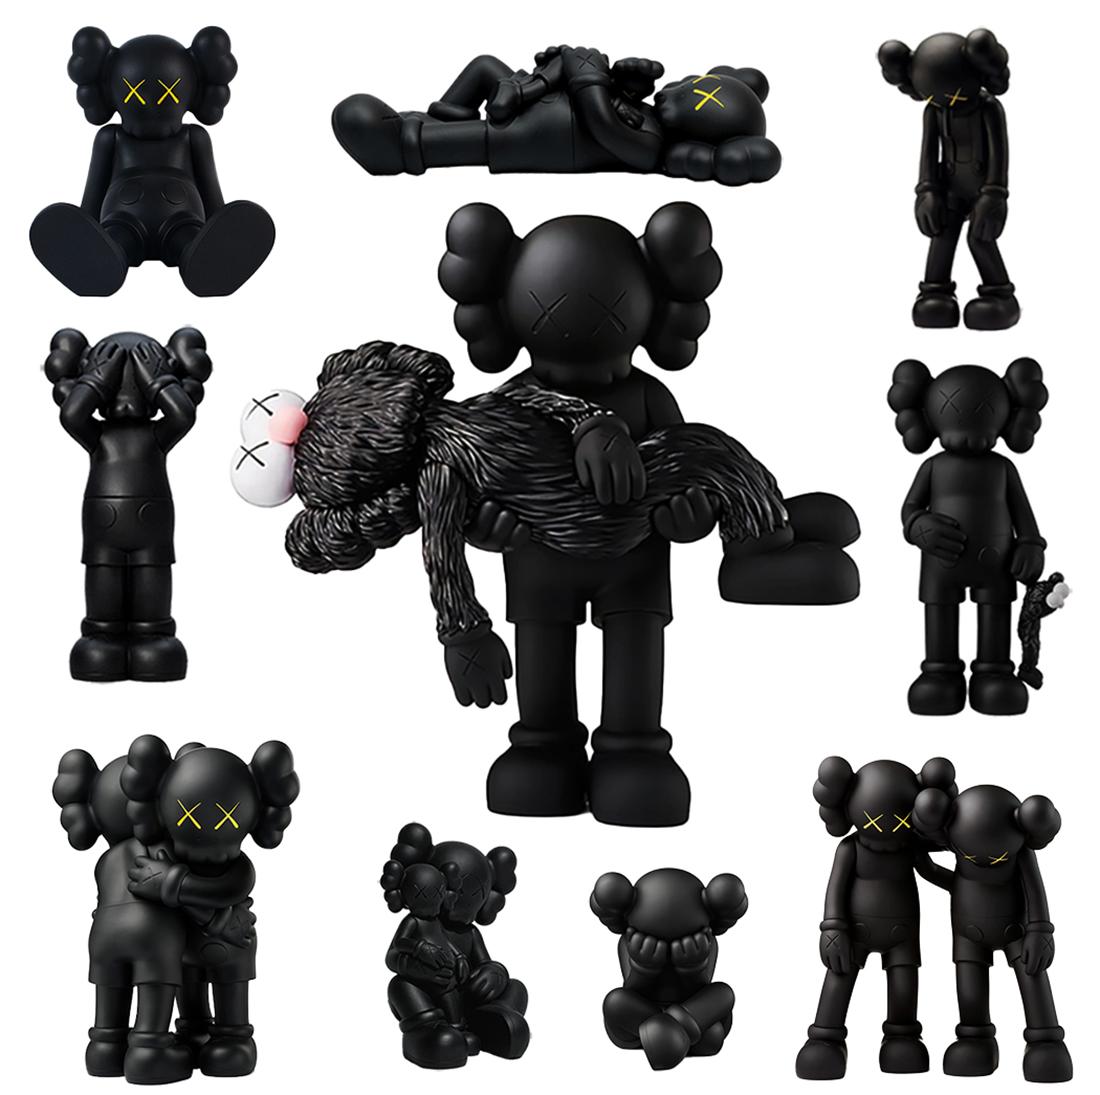 KAWS Companion 2017-2022:
A sharply curated set of 10 distinguished individual Black KAWS Companions new & unopened in original packaging. Dimensions as follows:

KAWS Gone 2019: 14.25 x 7 inches. 
KAWS Along The Way 2019: 10.5 x 9 inches. 
KAWS